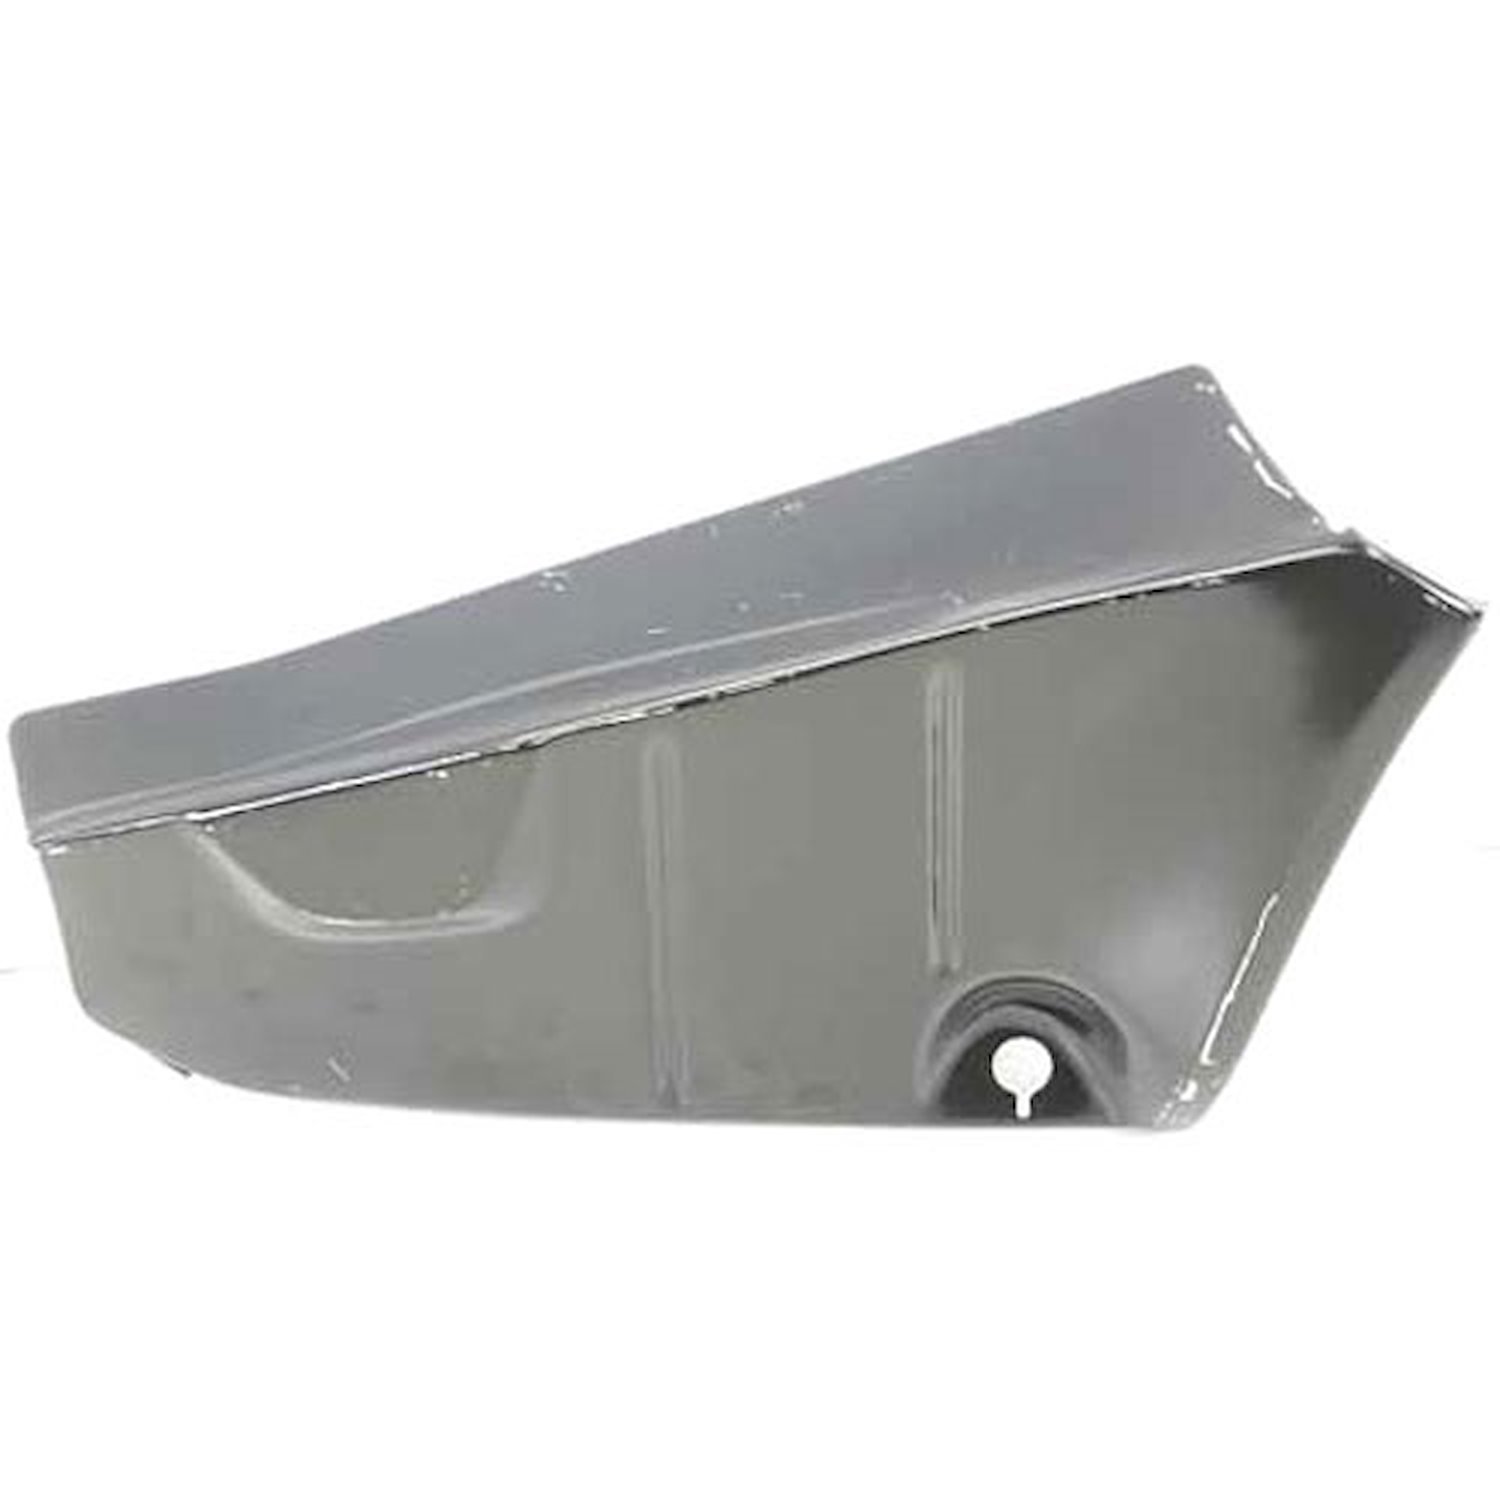 E502 Trunk Drop Off Lower Side Panel, 1974-1981 Chevy Camaro, Right/Passenger Side